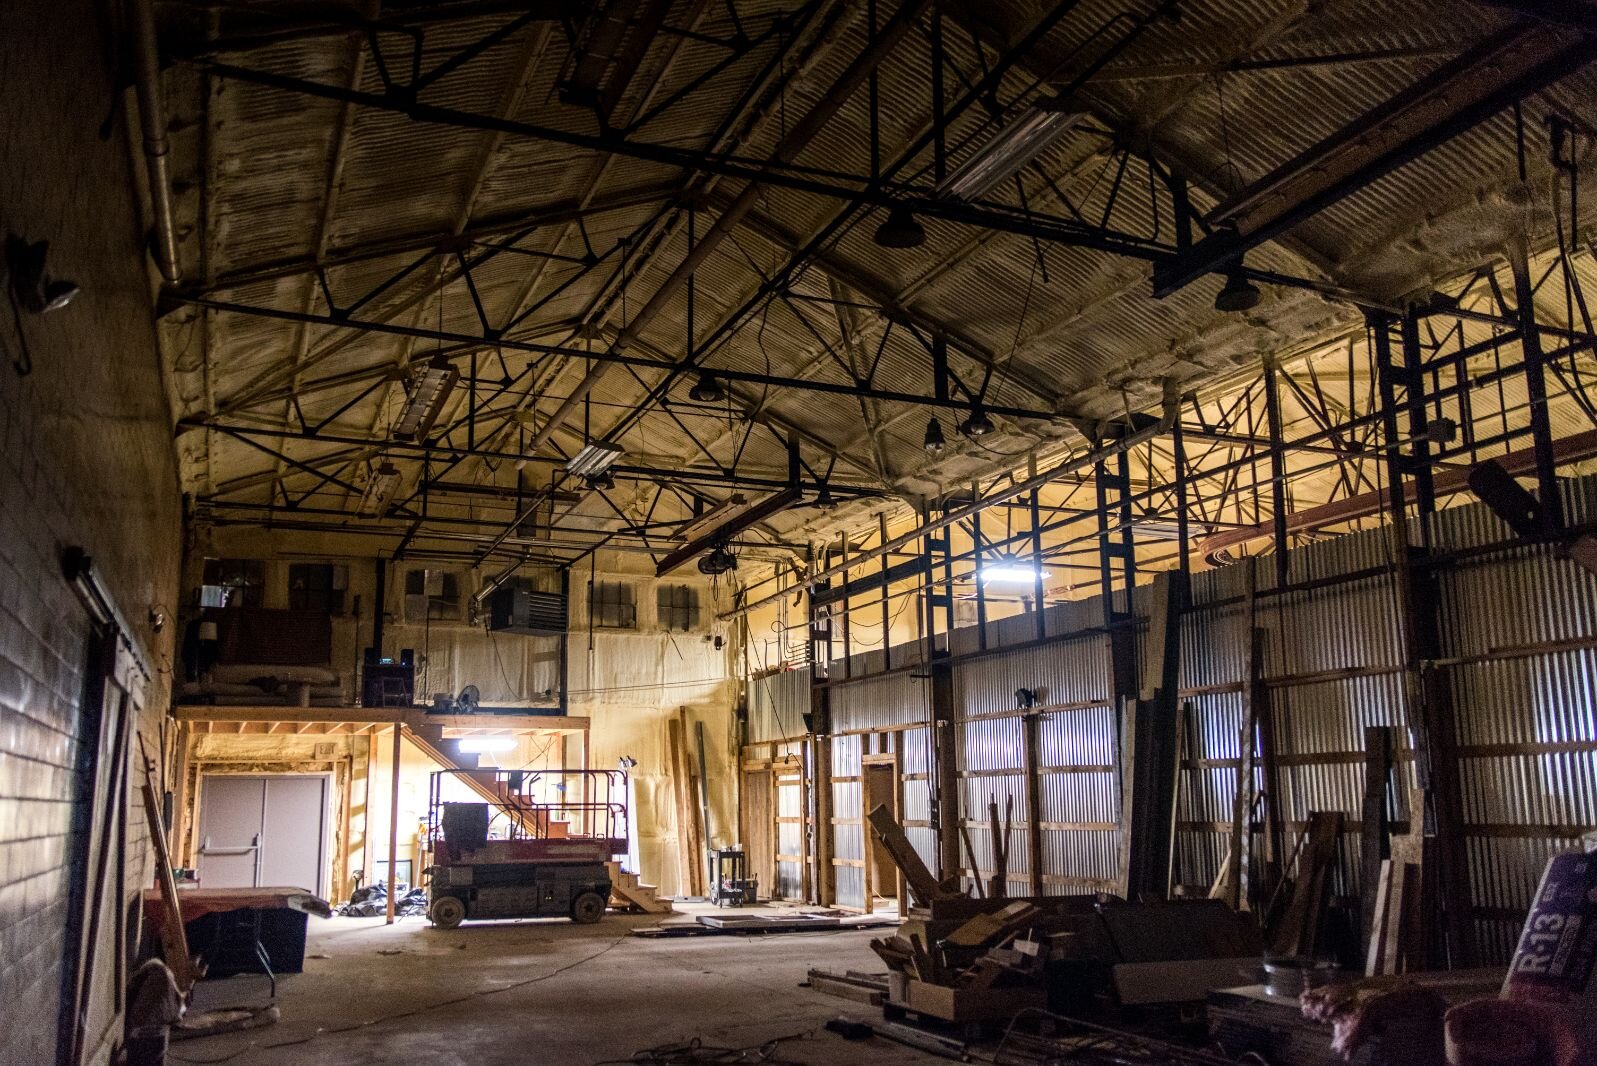 The  Wax Building is a 17,000 square-foot former paraffin wax factory that is being converted for use as an artistic workshop, gallery and performance space for every artists.